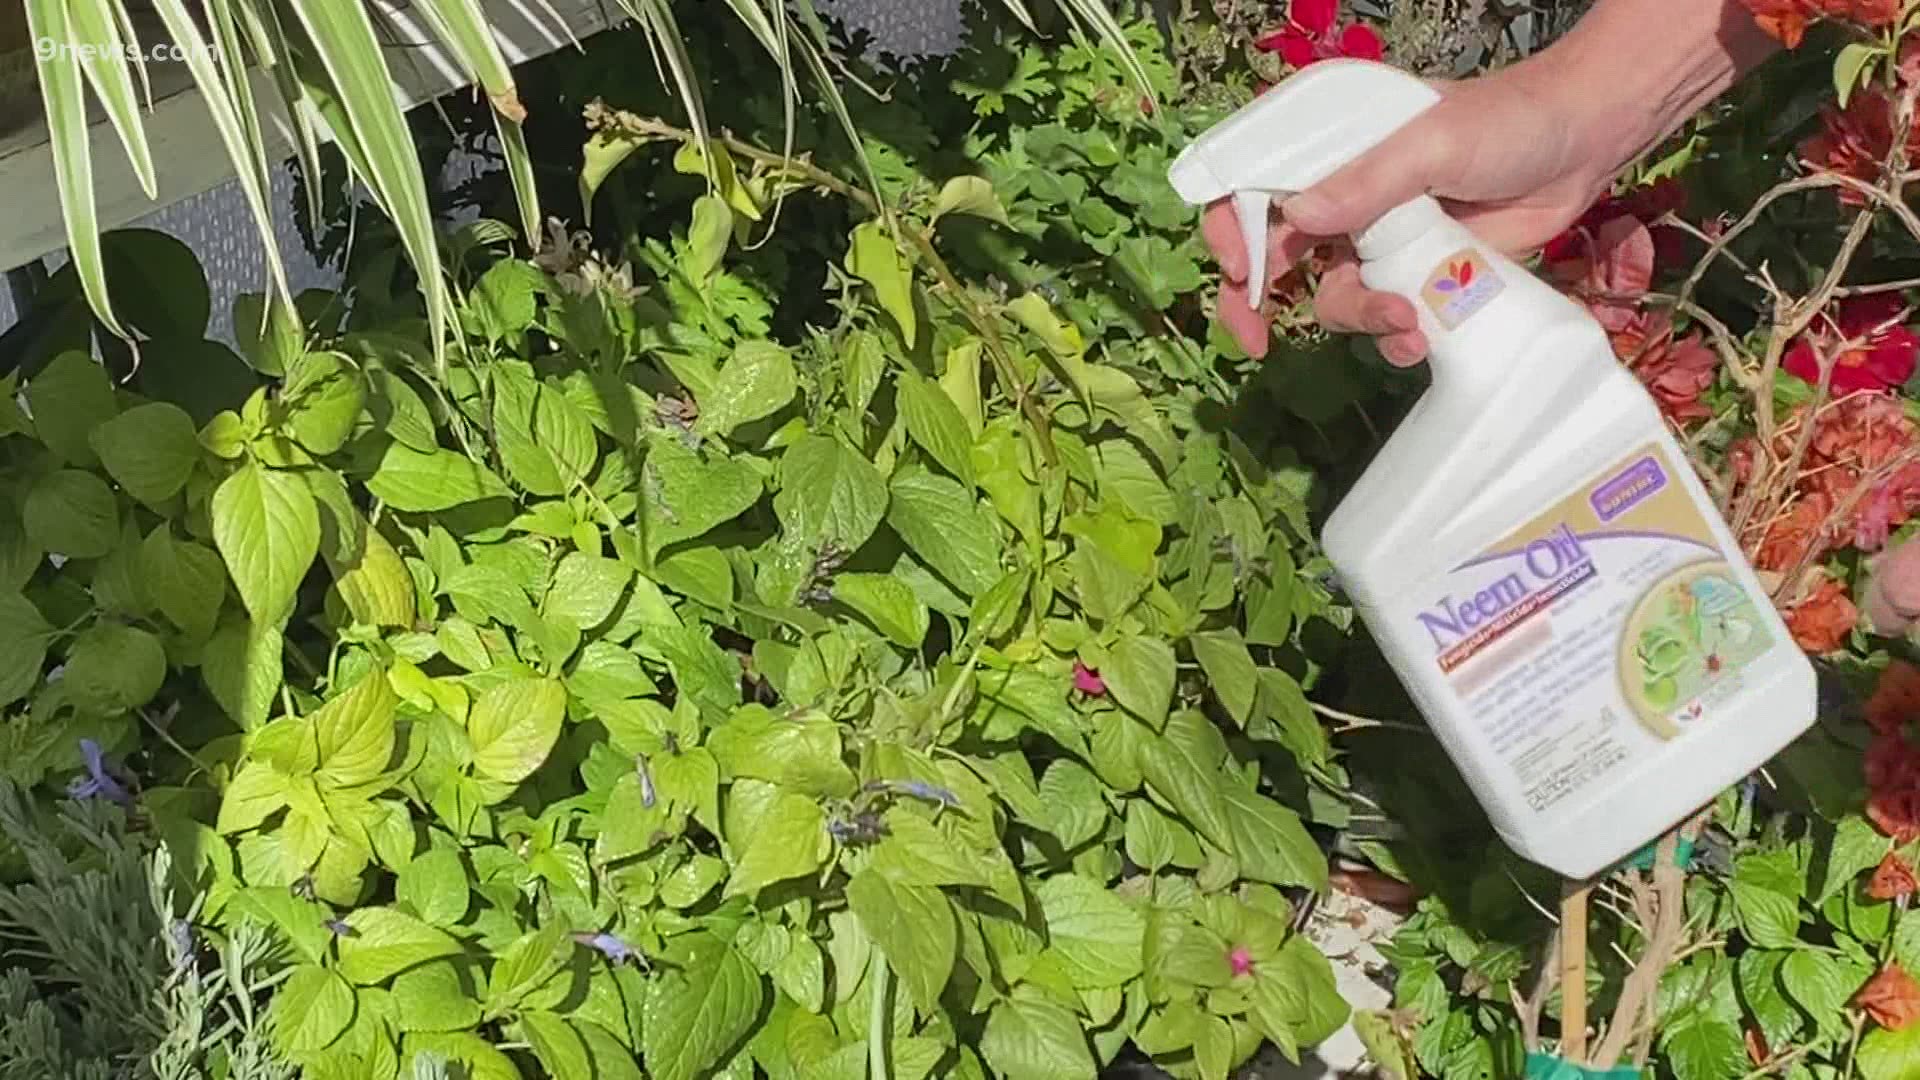 Make sure to buy your plants from a reputable source, inspect your plants before buying and regularly check for infestations.